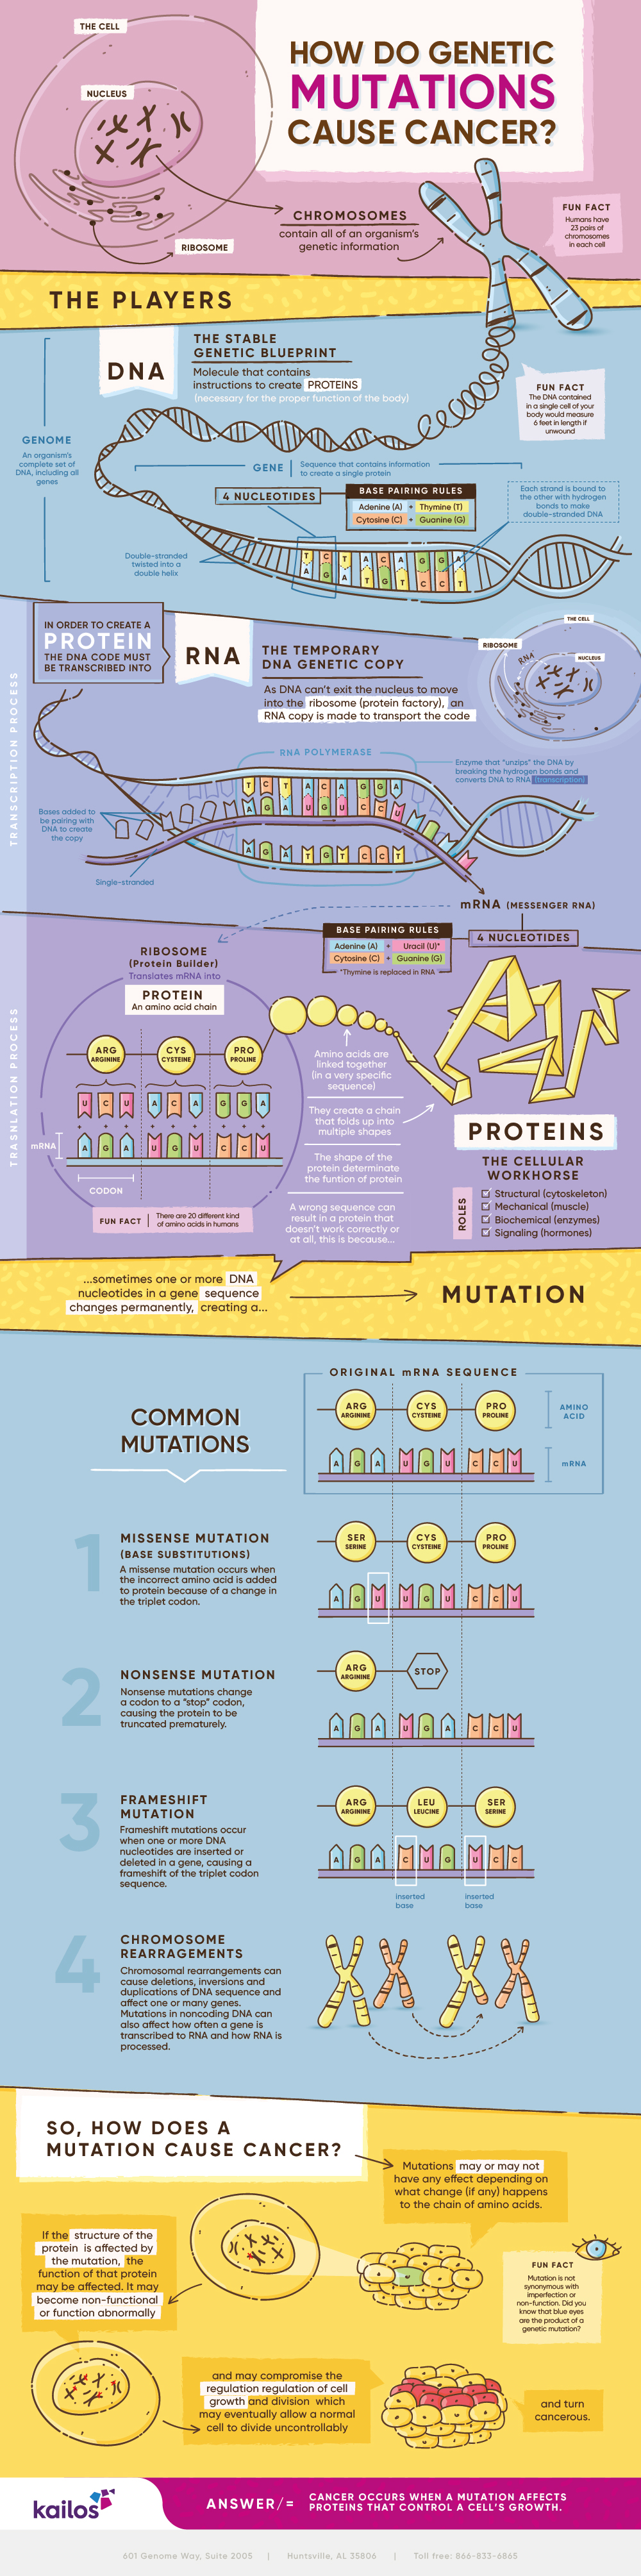 How mutations cause cancer